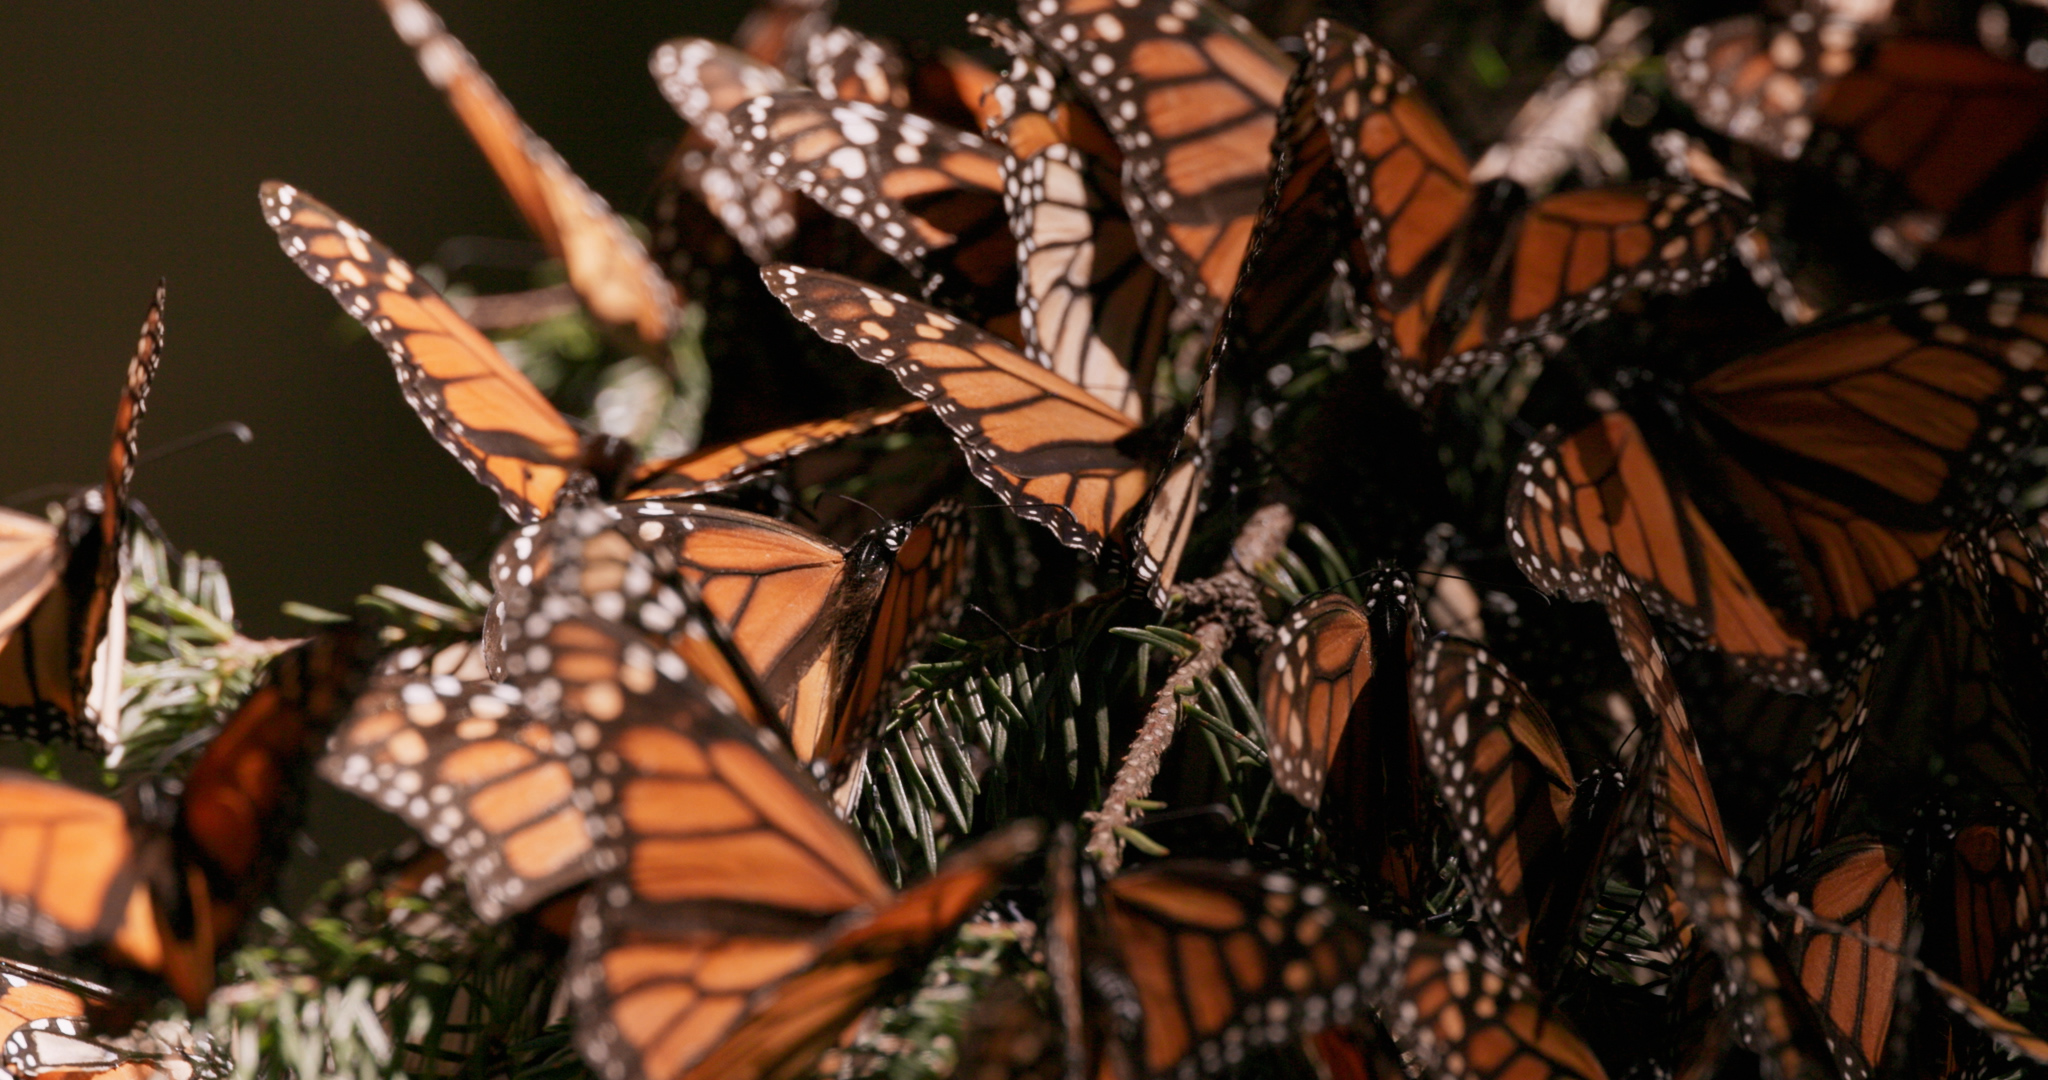 A multitude of monarch butterflies rest on a plant. They have brilliant orange-red wings with black veins and white spots on the edges.